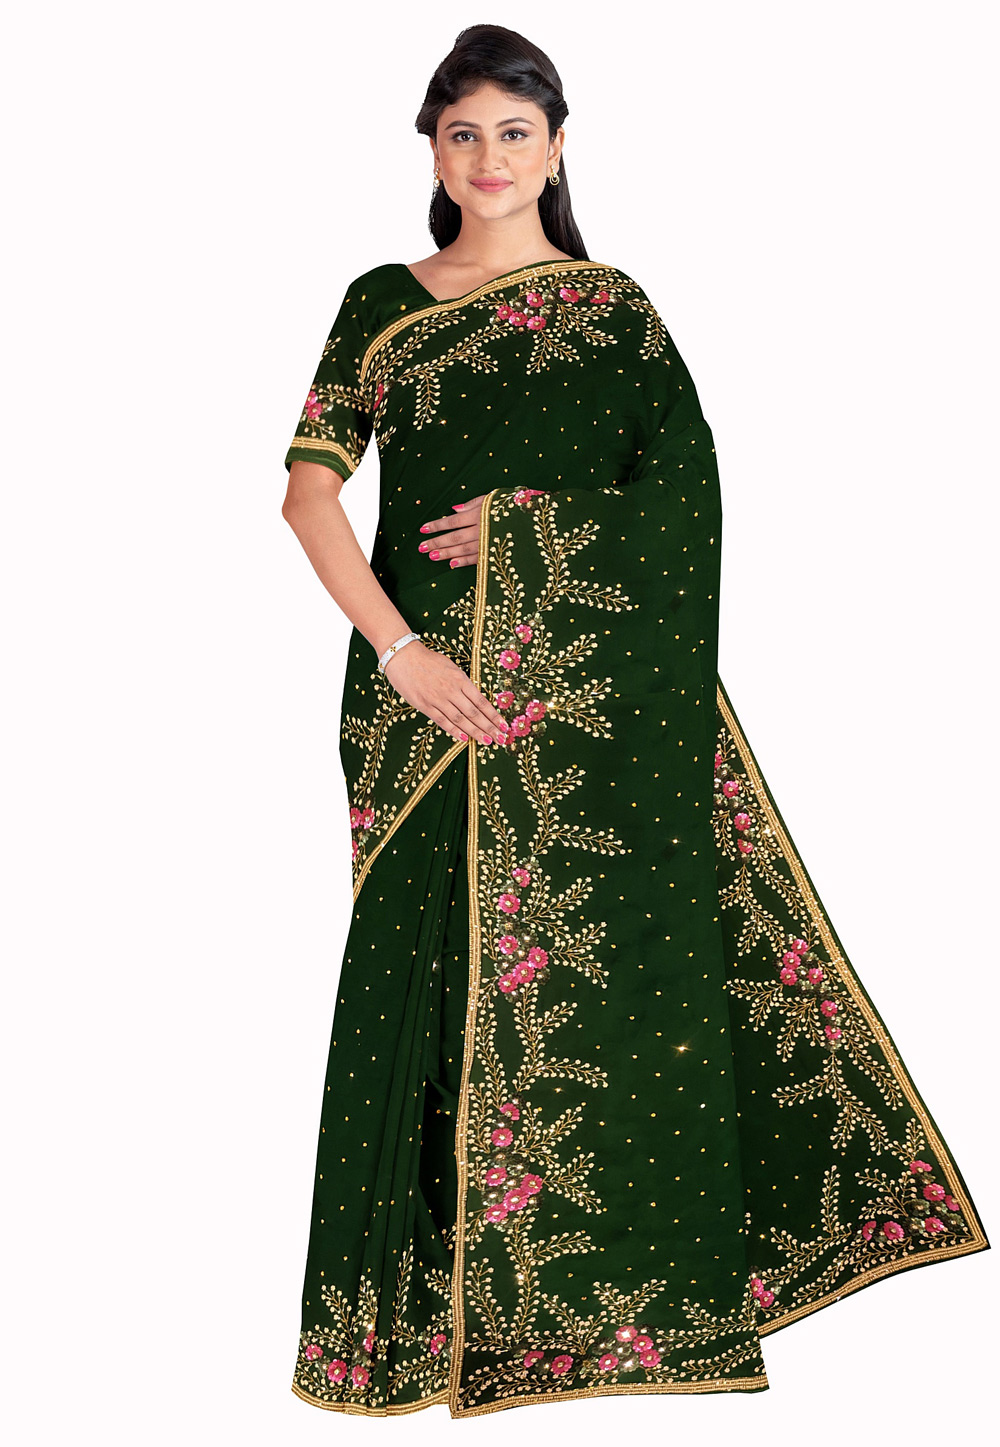 Green Georgette Saree With Blouse 205644